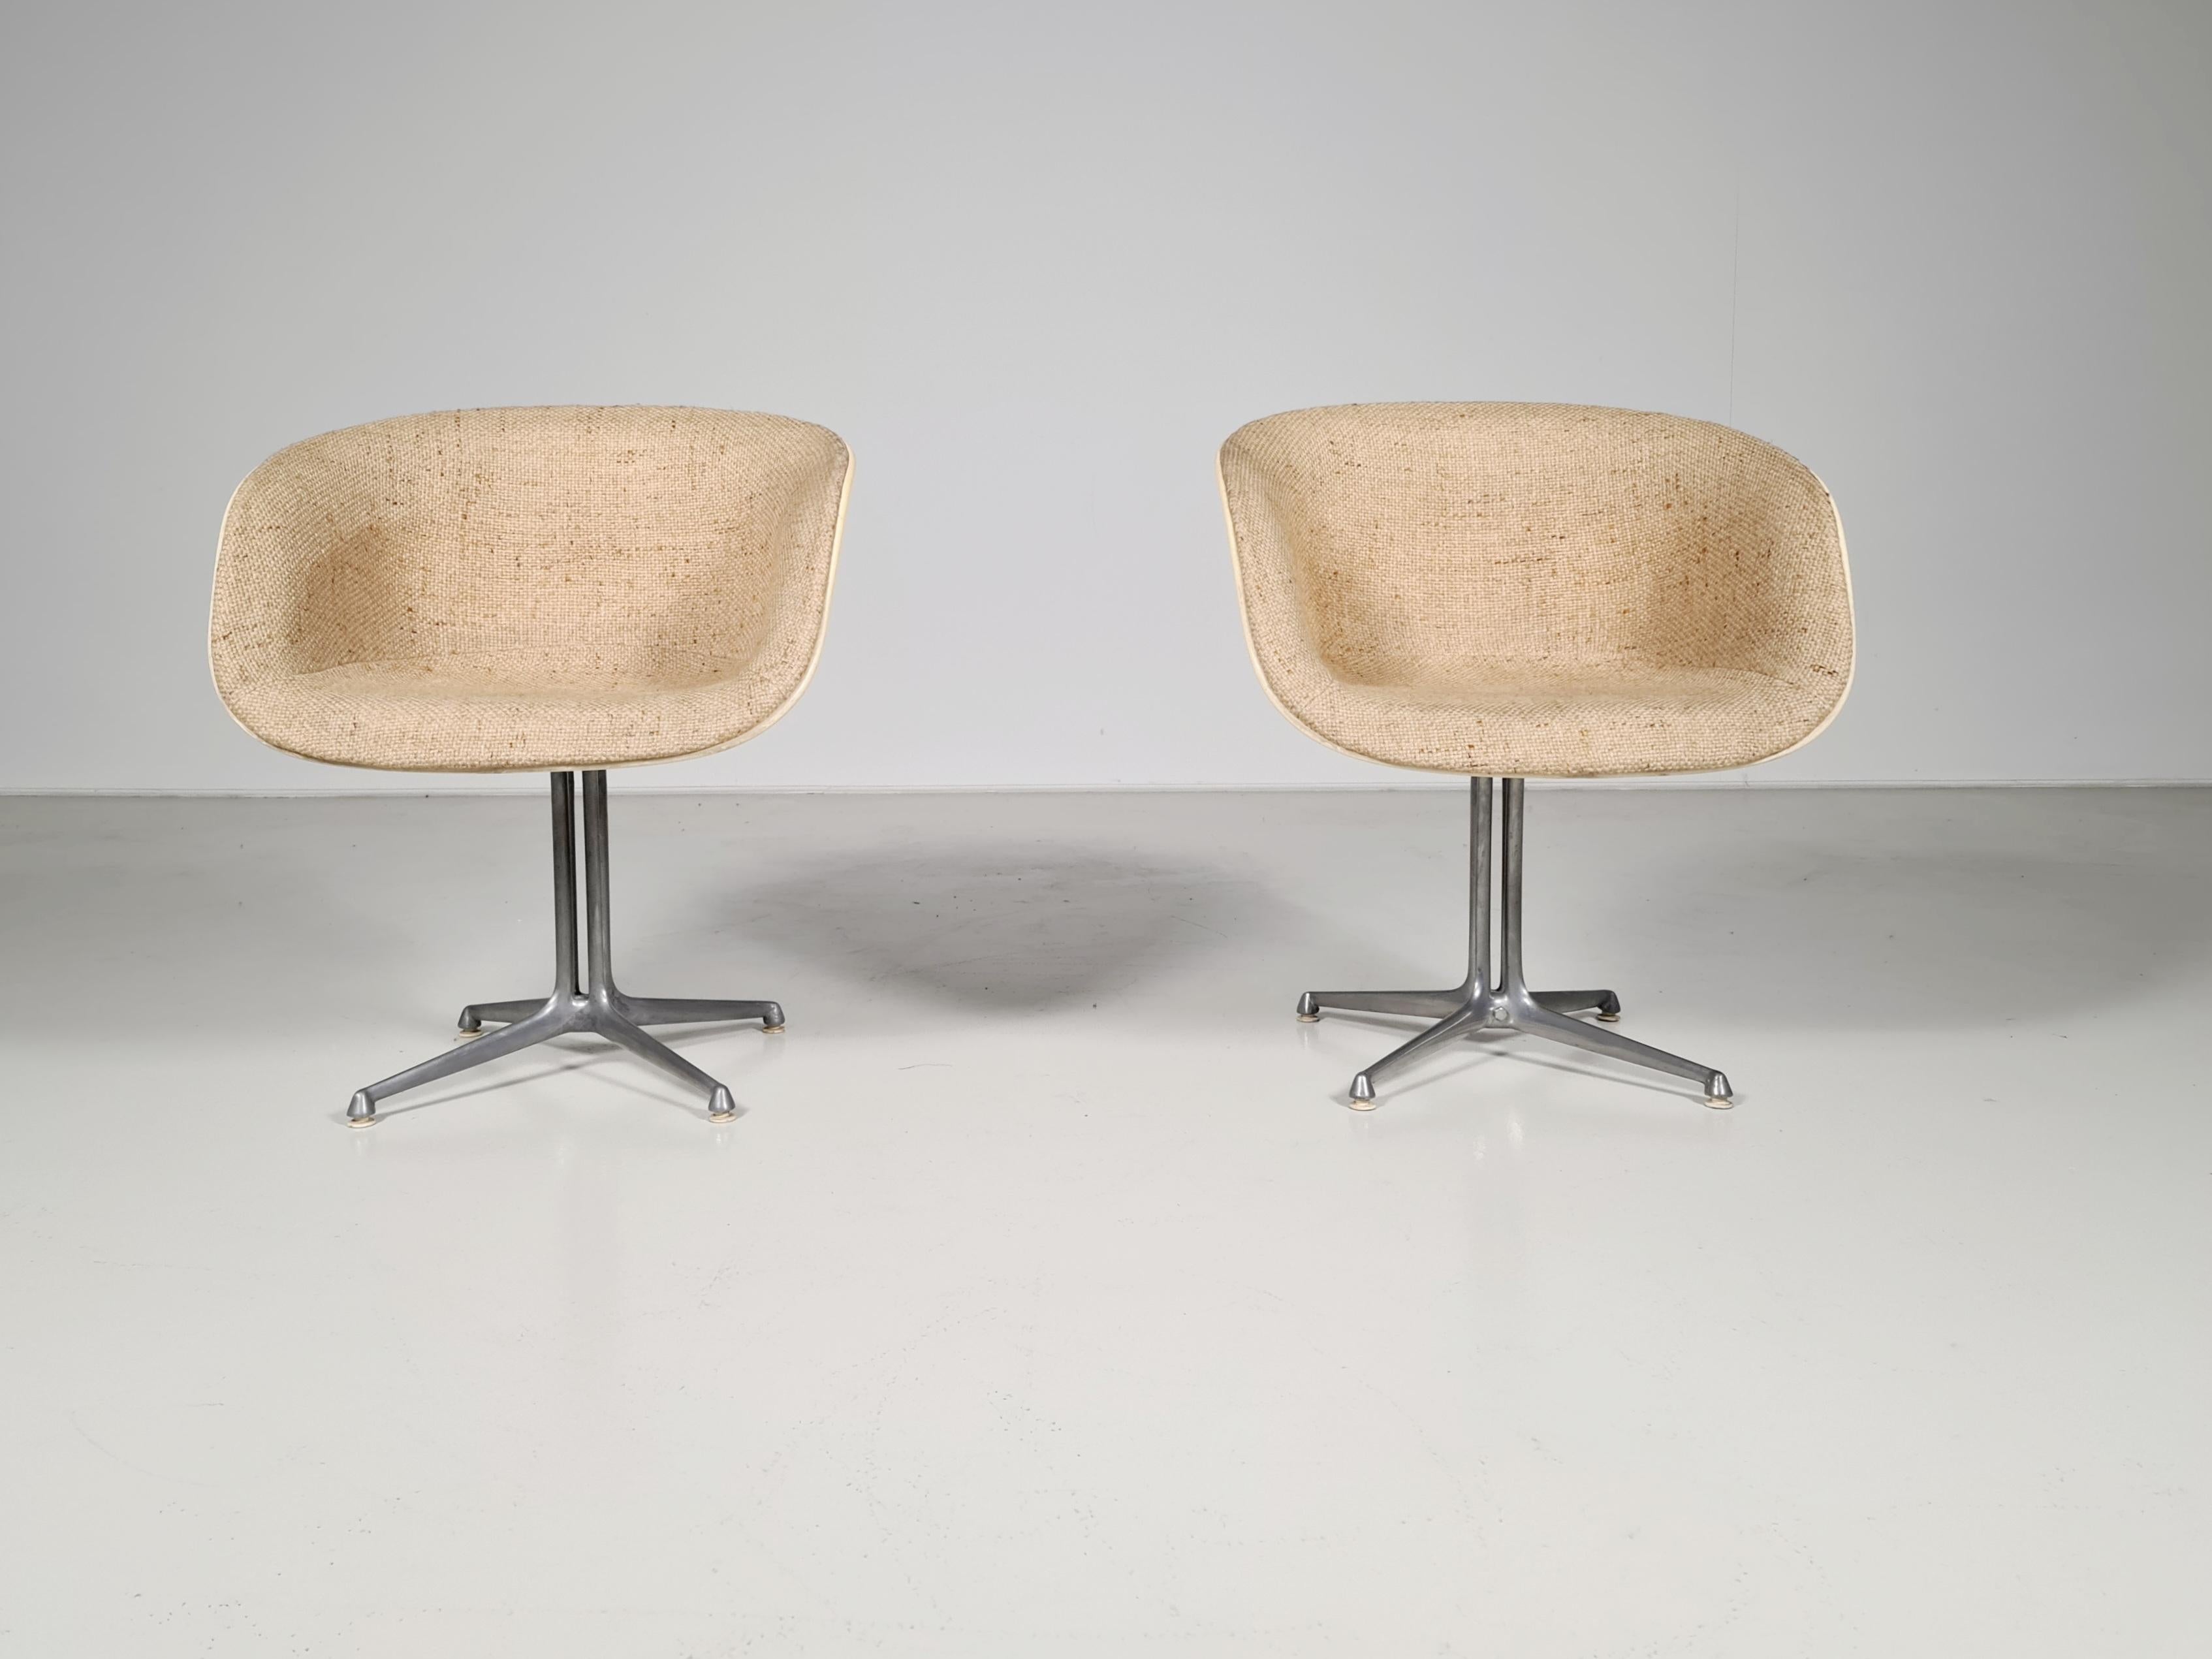 La Fonda chairs by Eames for Vitra, Orange, Fiberglass, 1960s.

This lovely set of two La Fonda armchairs is the absolute eye-catcher in every stylish room. They come in their original wool fabric.

The La Fonda armchairs are named after the